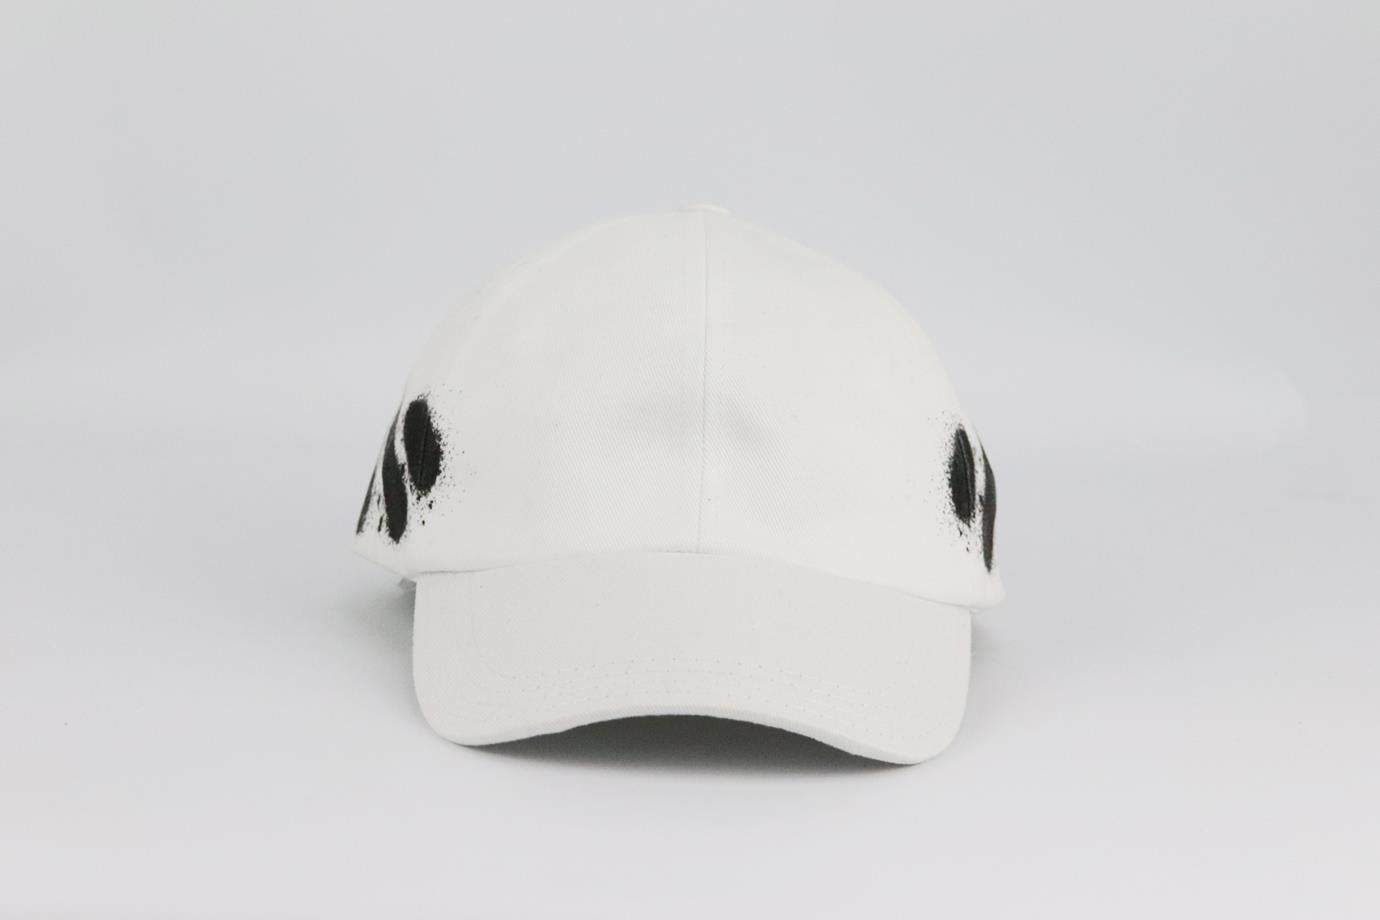 OFF-WHITE C/O VIRGIL ABLOH PRINTED COTTON TWILL BASEBALL CAP ONE SIZE